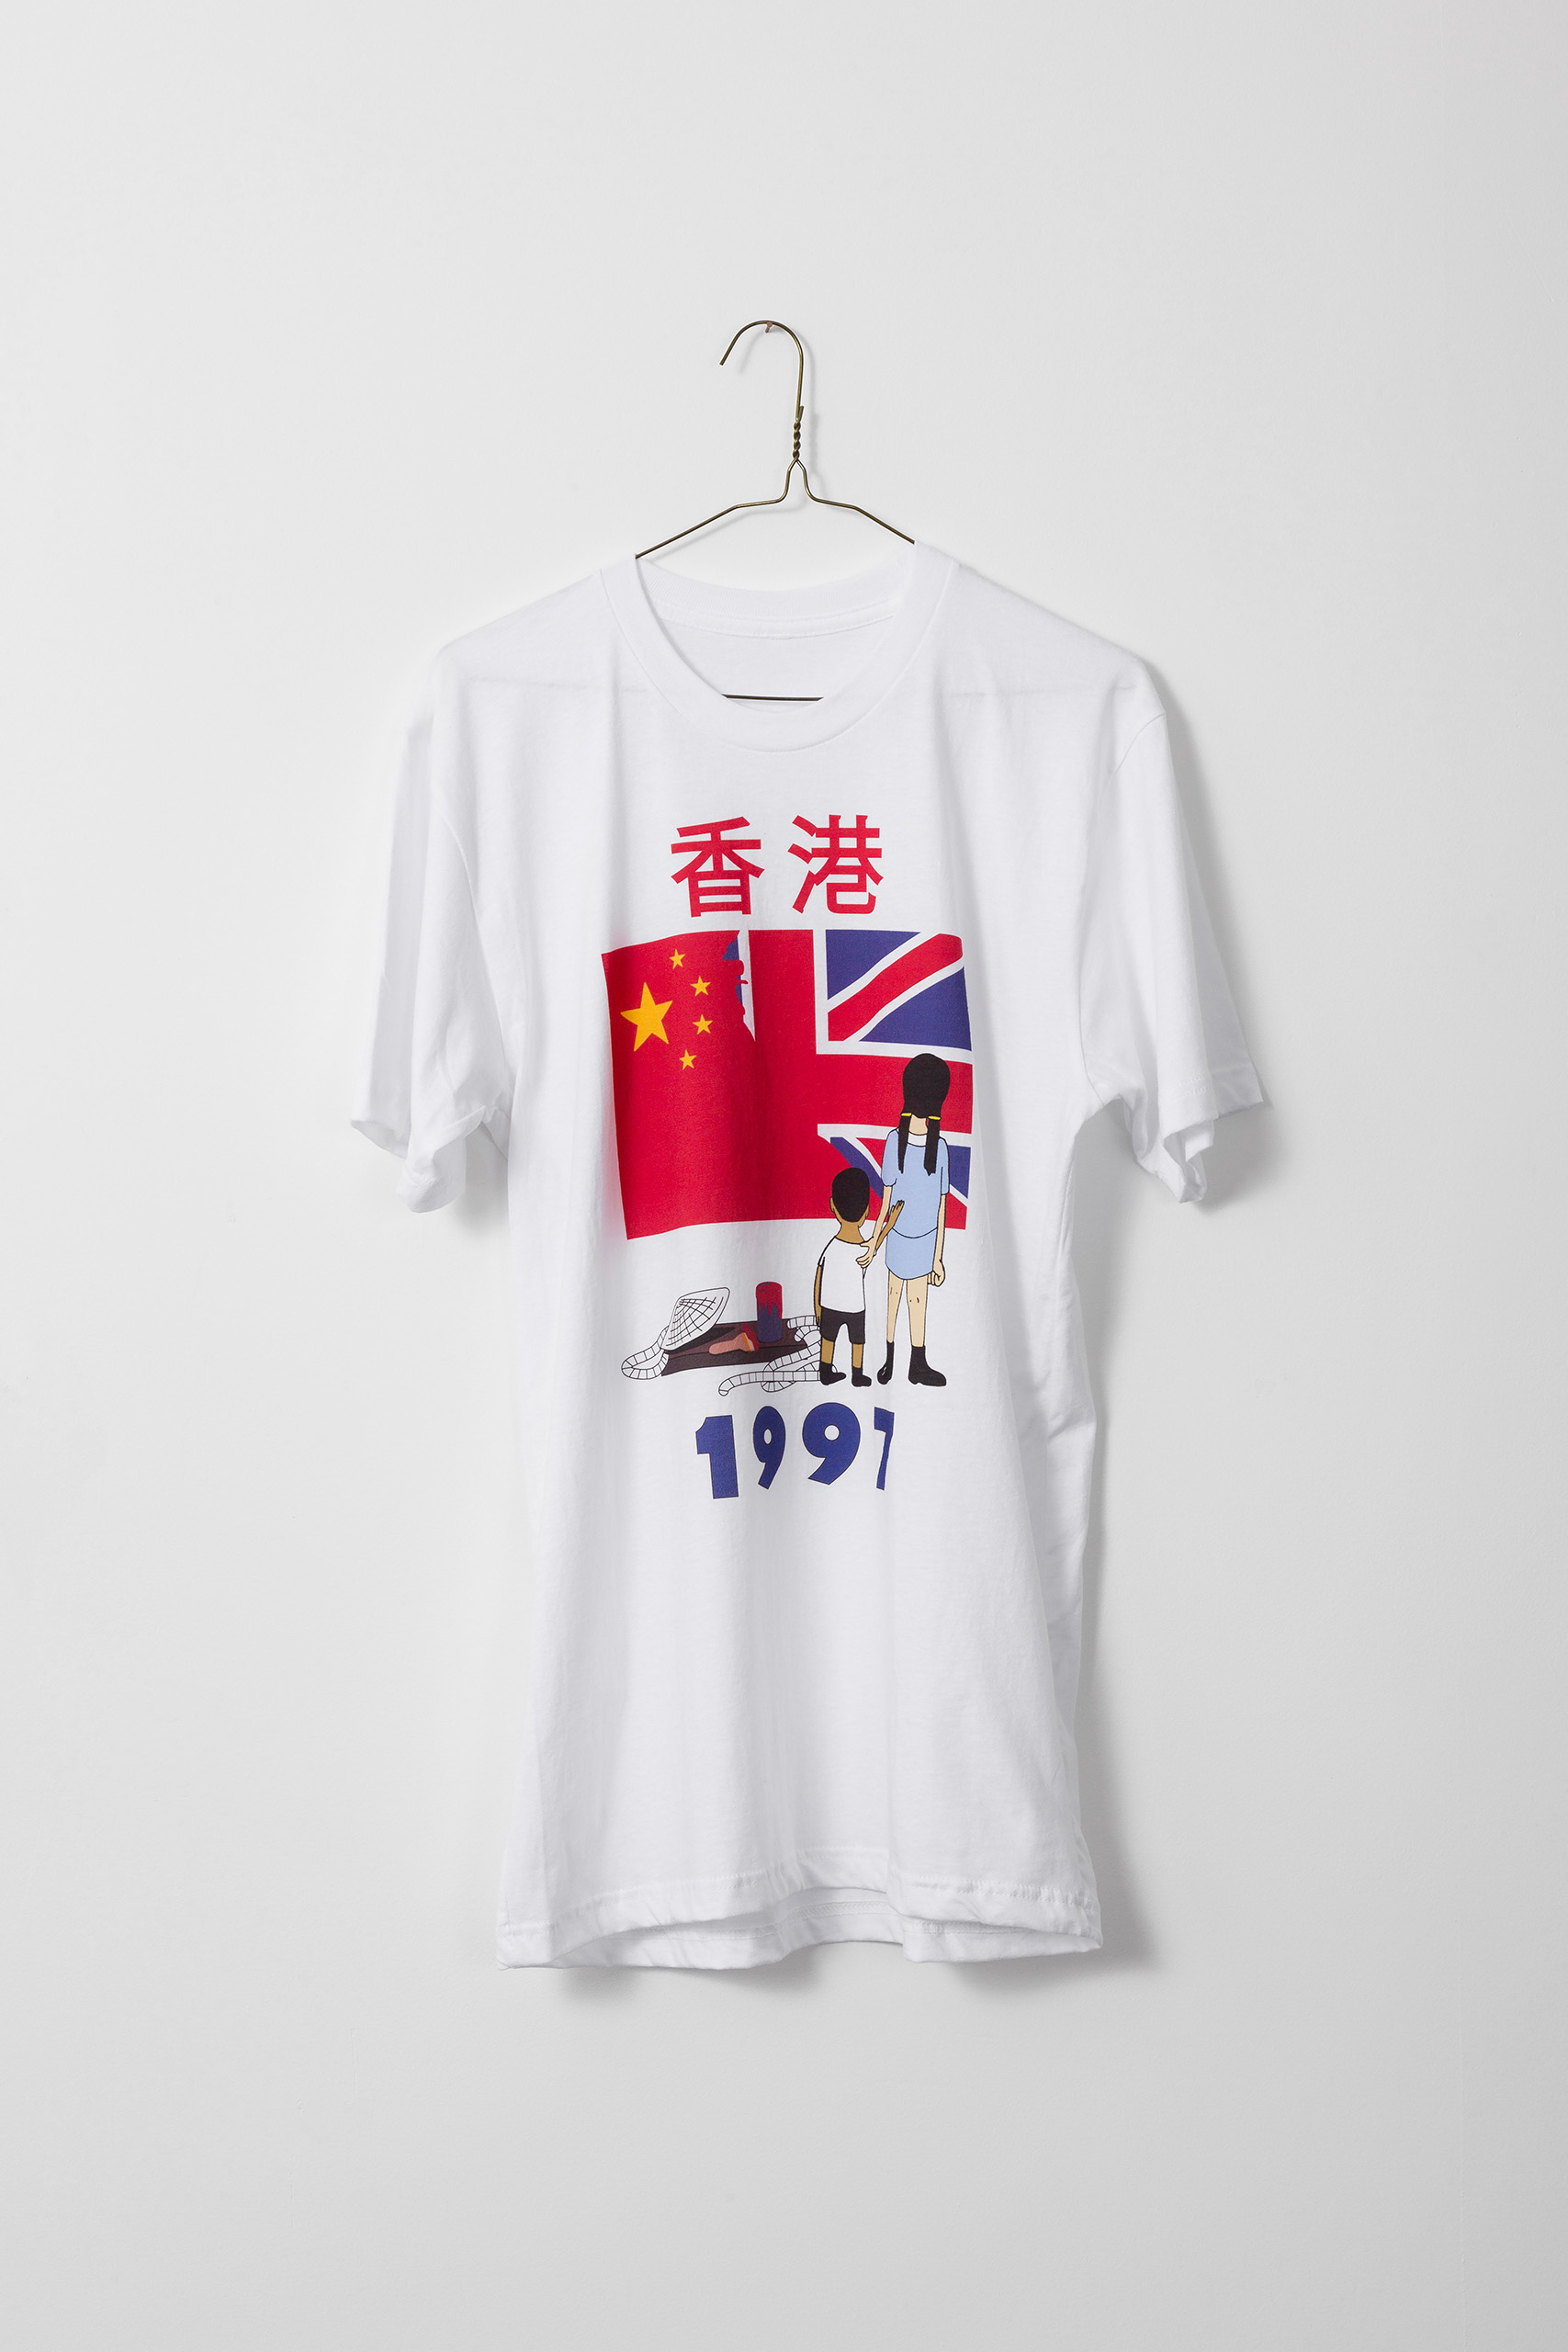 White t-shirt with a girl and boy arm-in-arm in front of a half-Chinese half-English flag, Chinese characters above and 1997 below